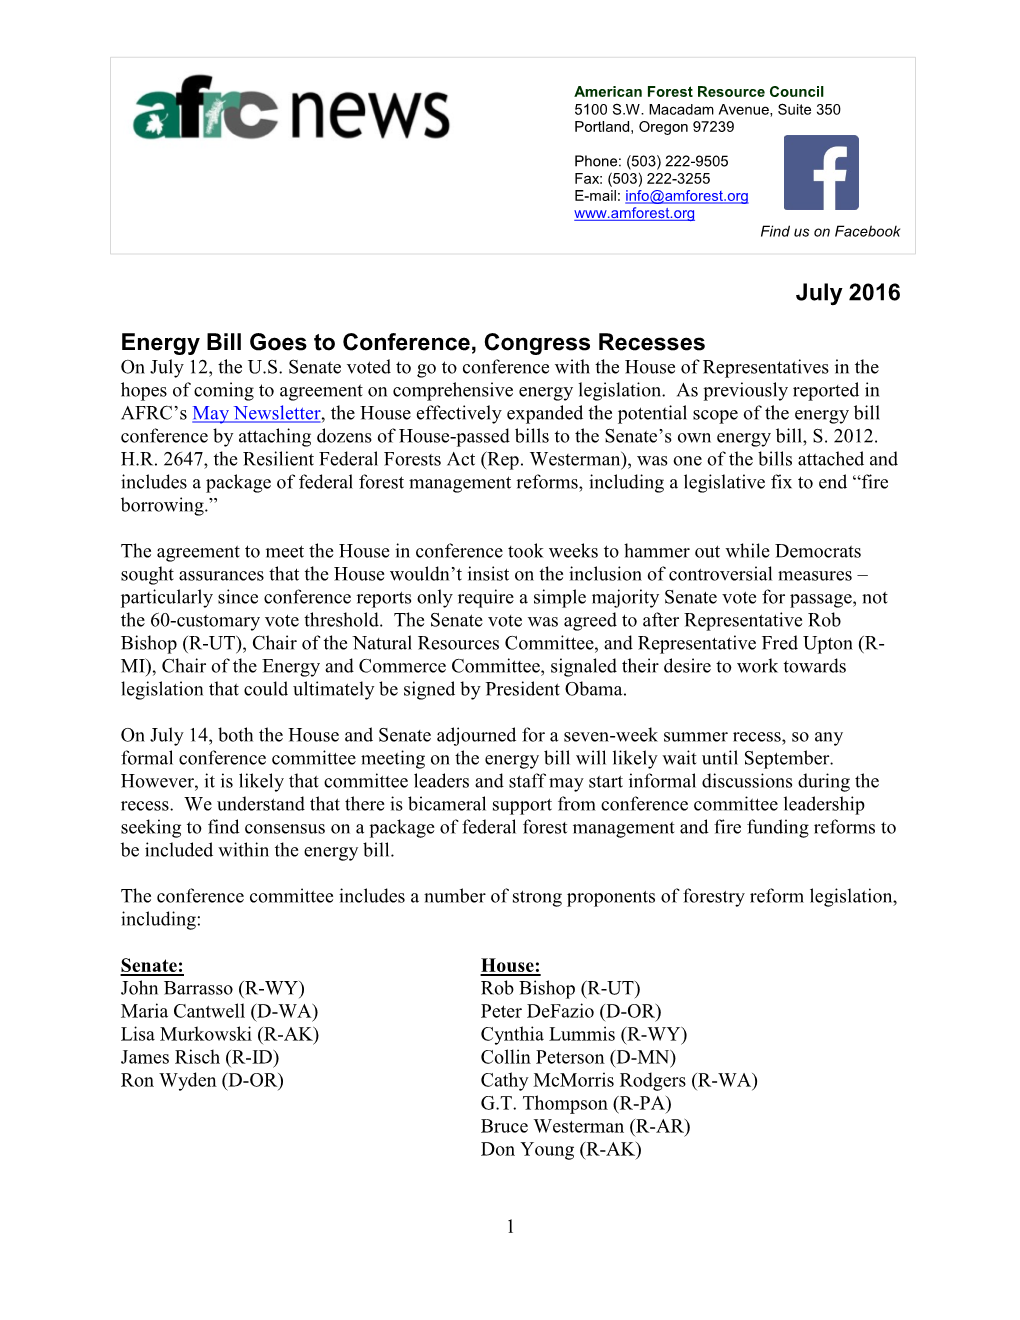 July 2016 Energy Bill Goes to Conference, Congress Recesses